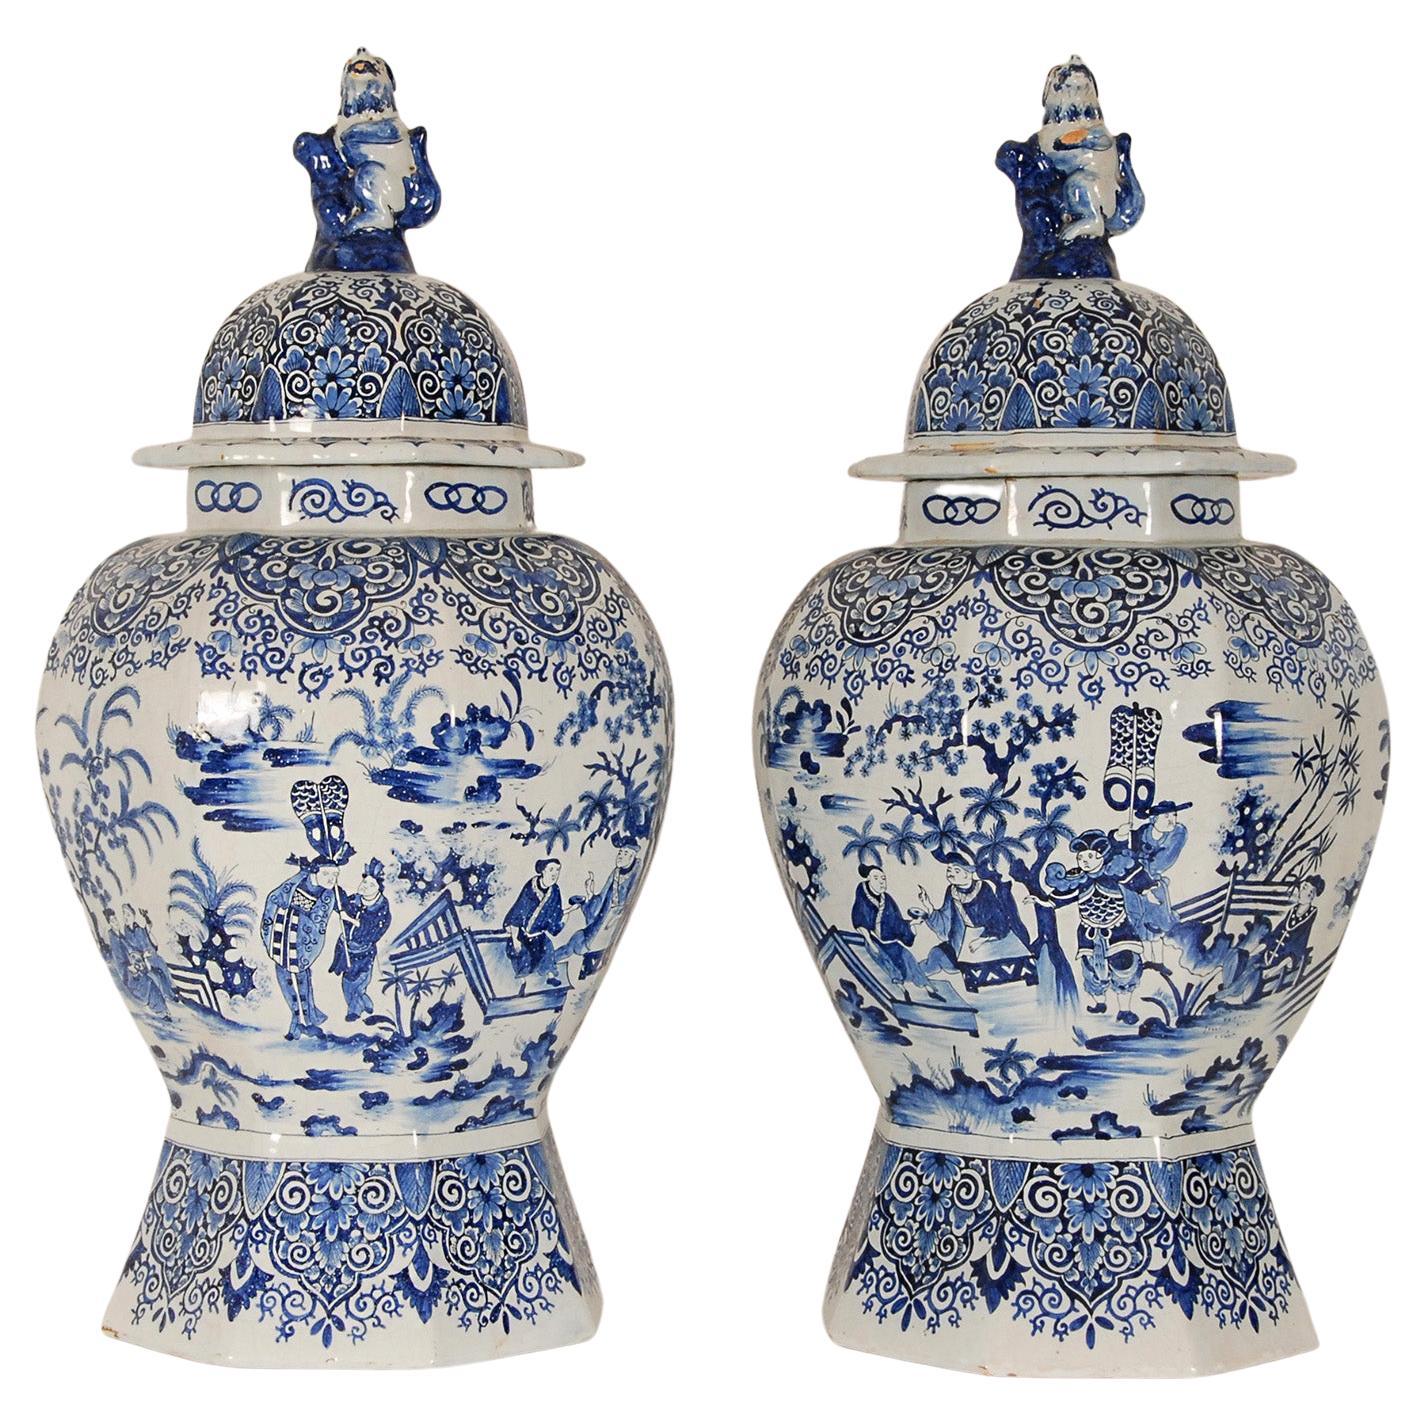 Delft Vases 17th century Style Earthenware Blue White Tall Baluster Vases a pair